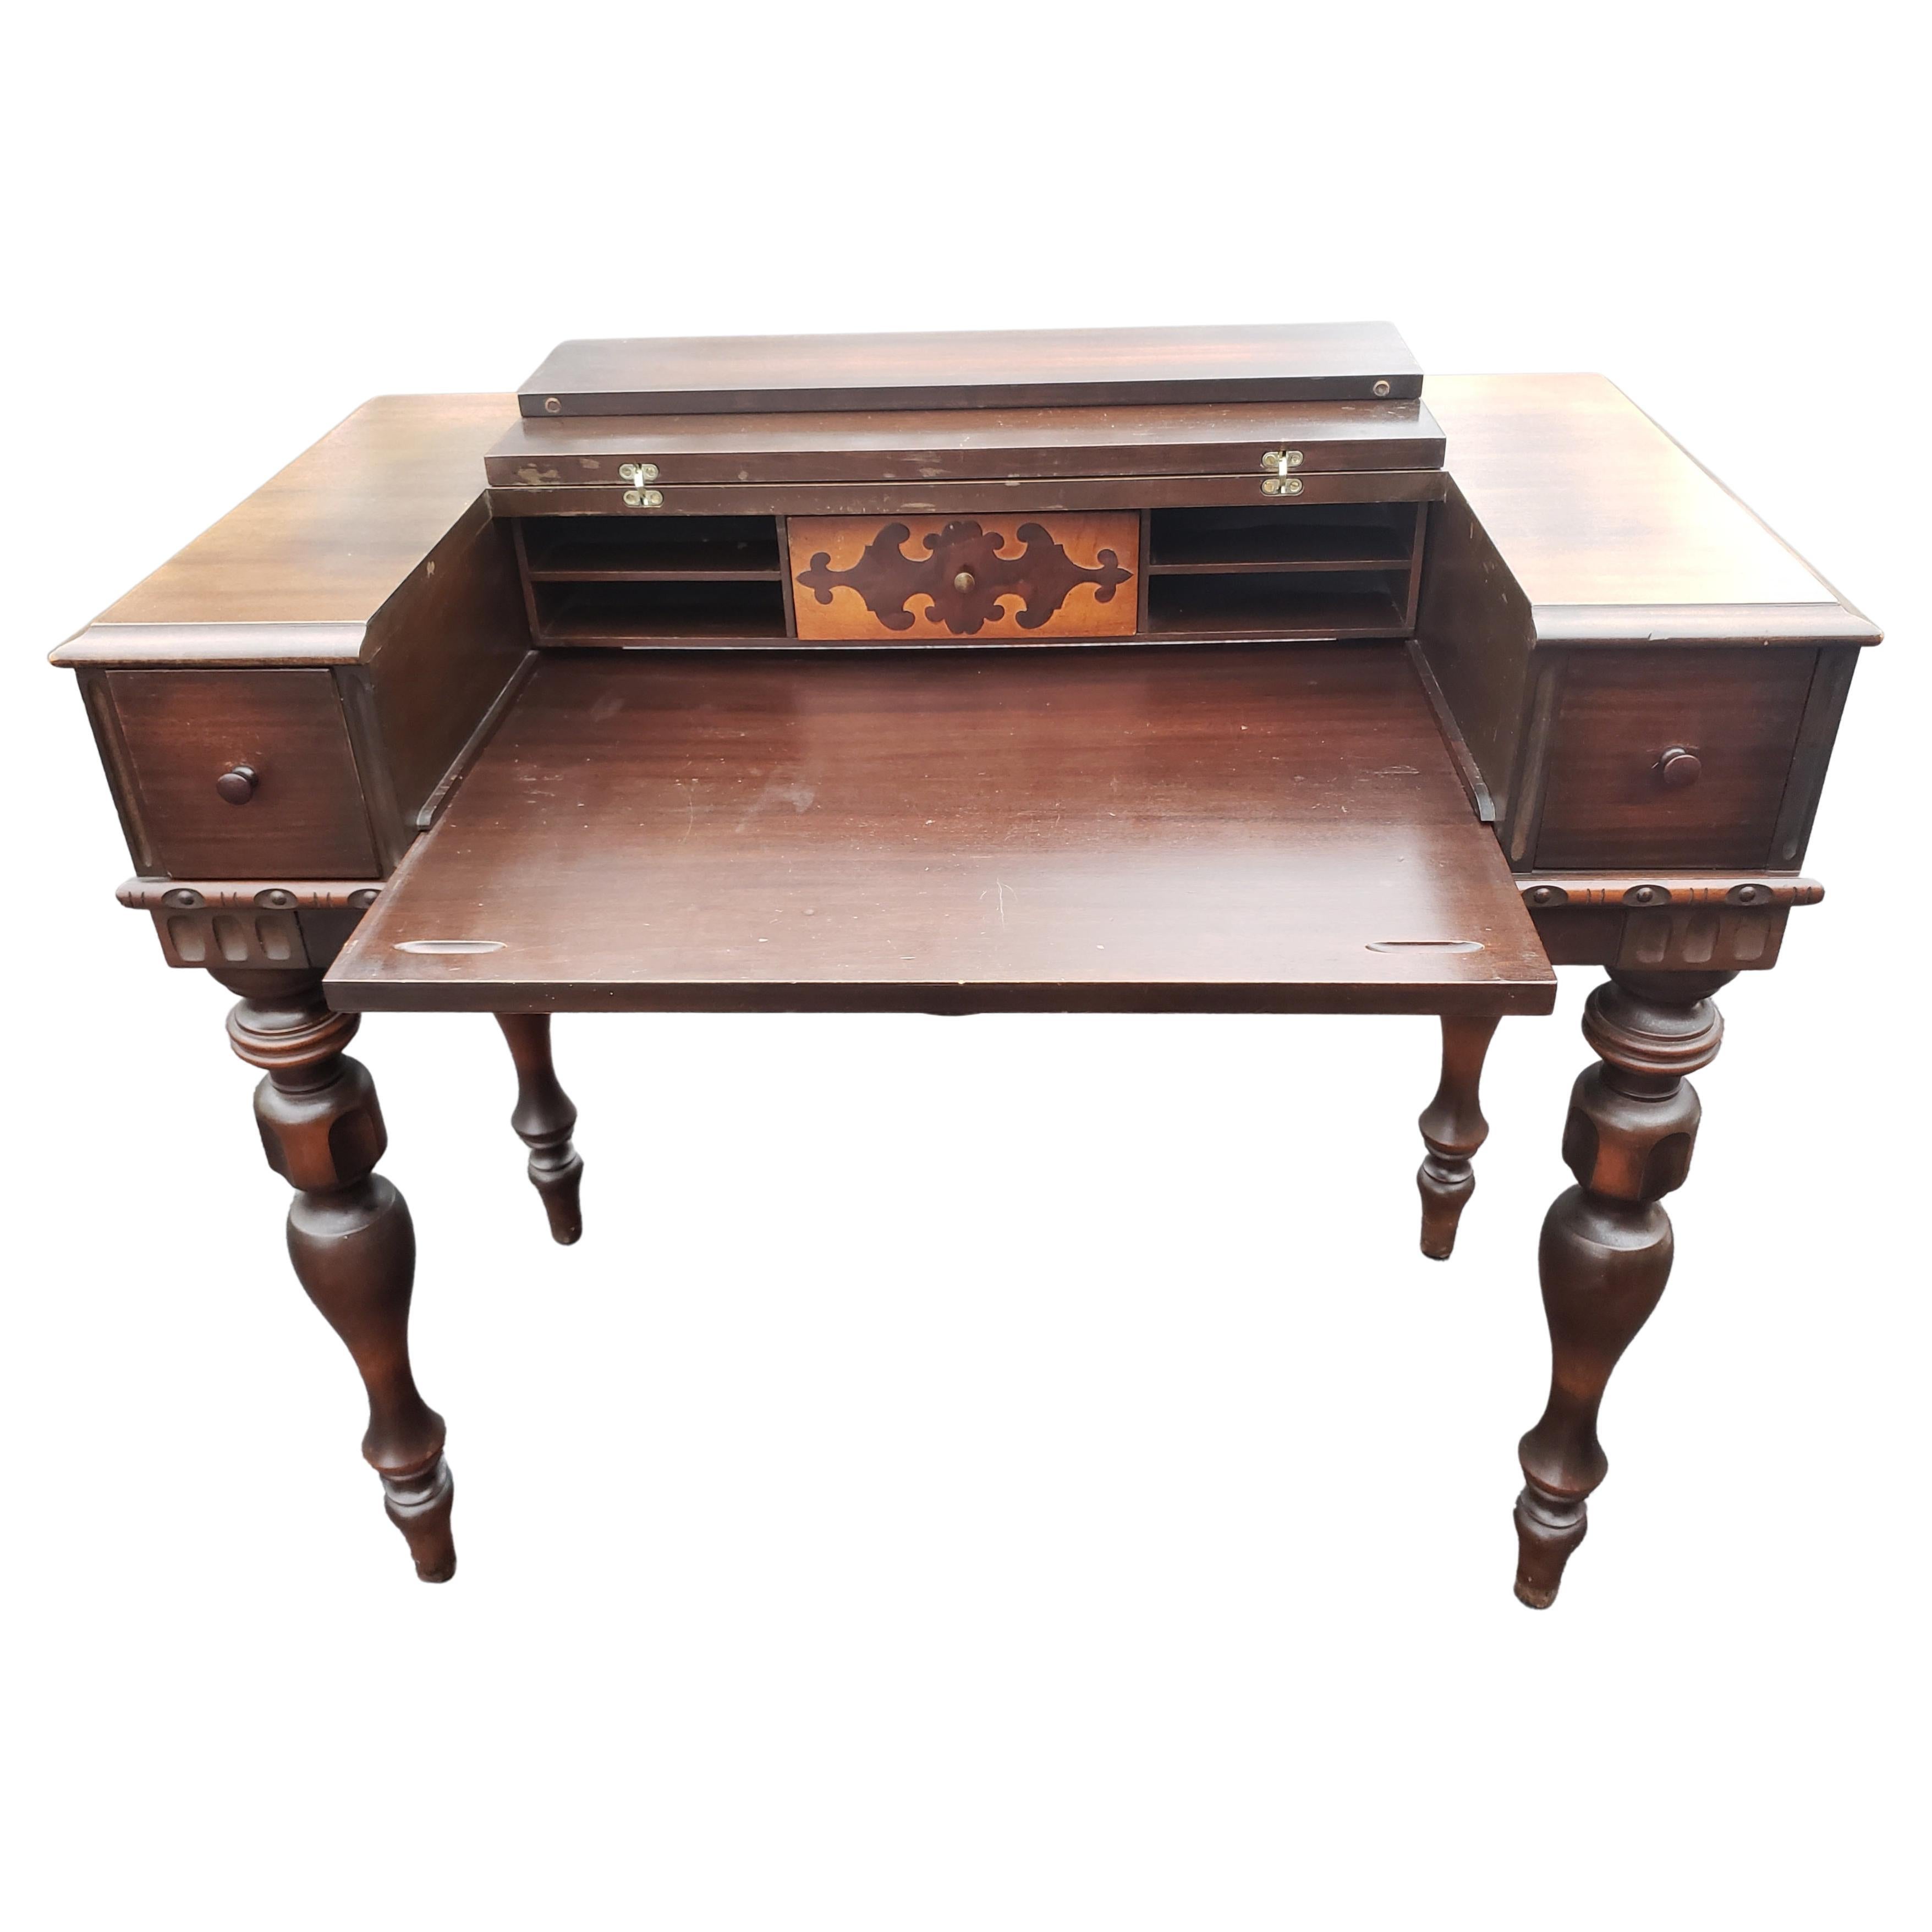 Vintage Edwardian Walnut Writing Desk, Sofa Table, Hall Table In Good Condition For Sale In Germantown, MD